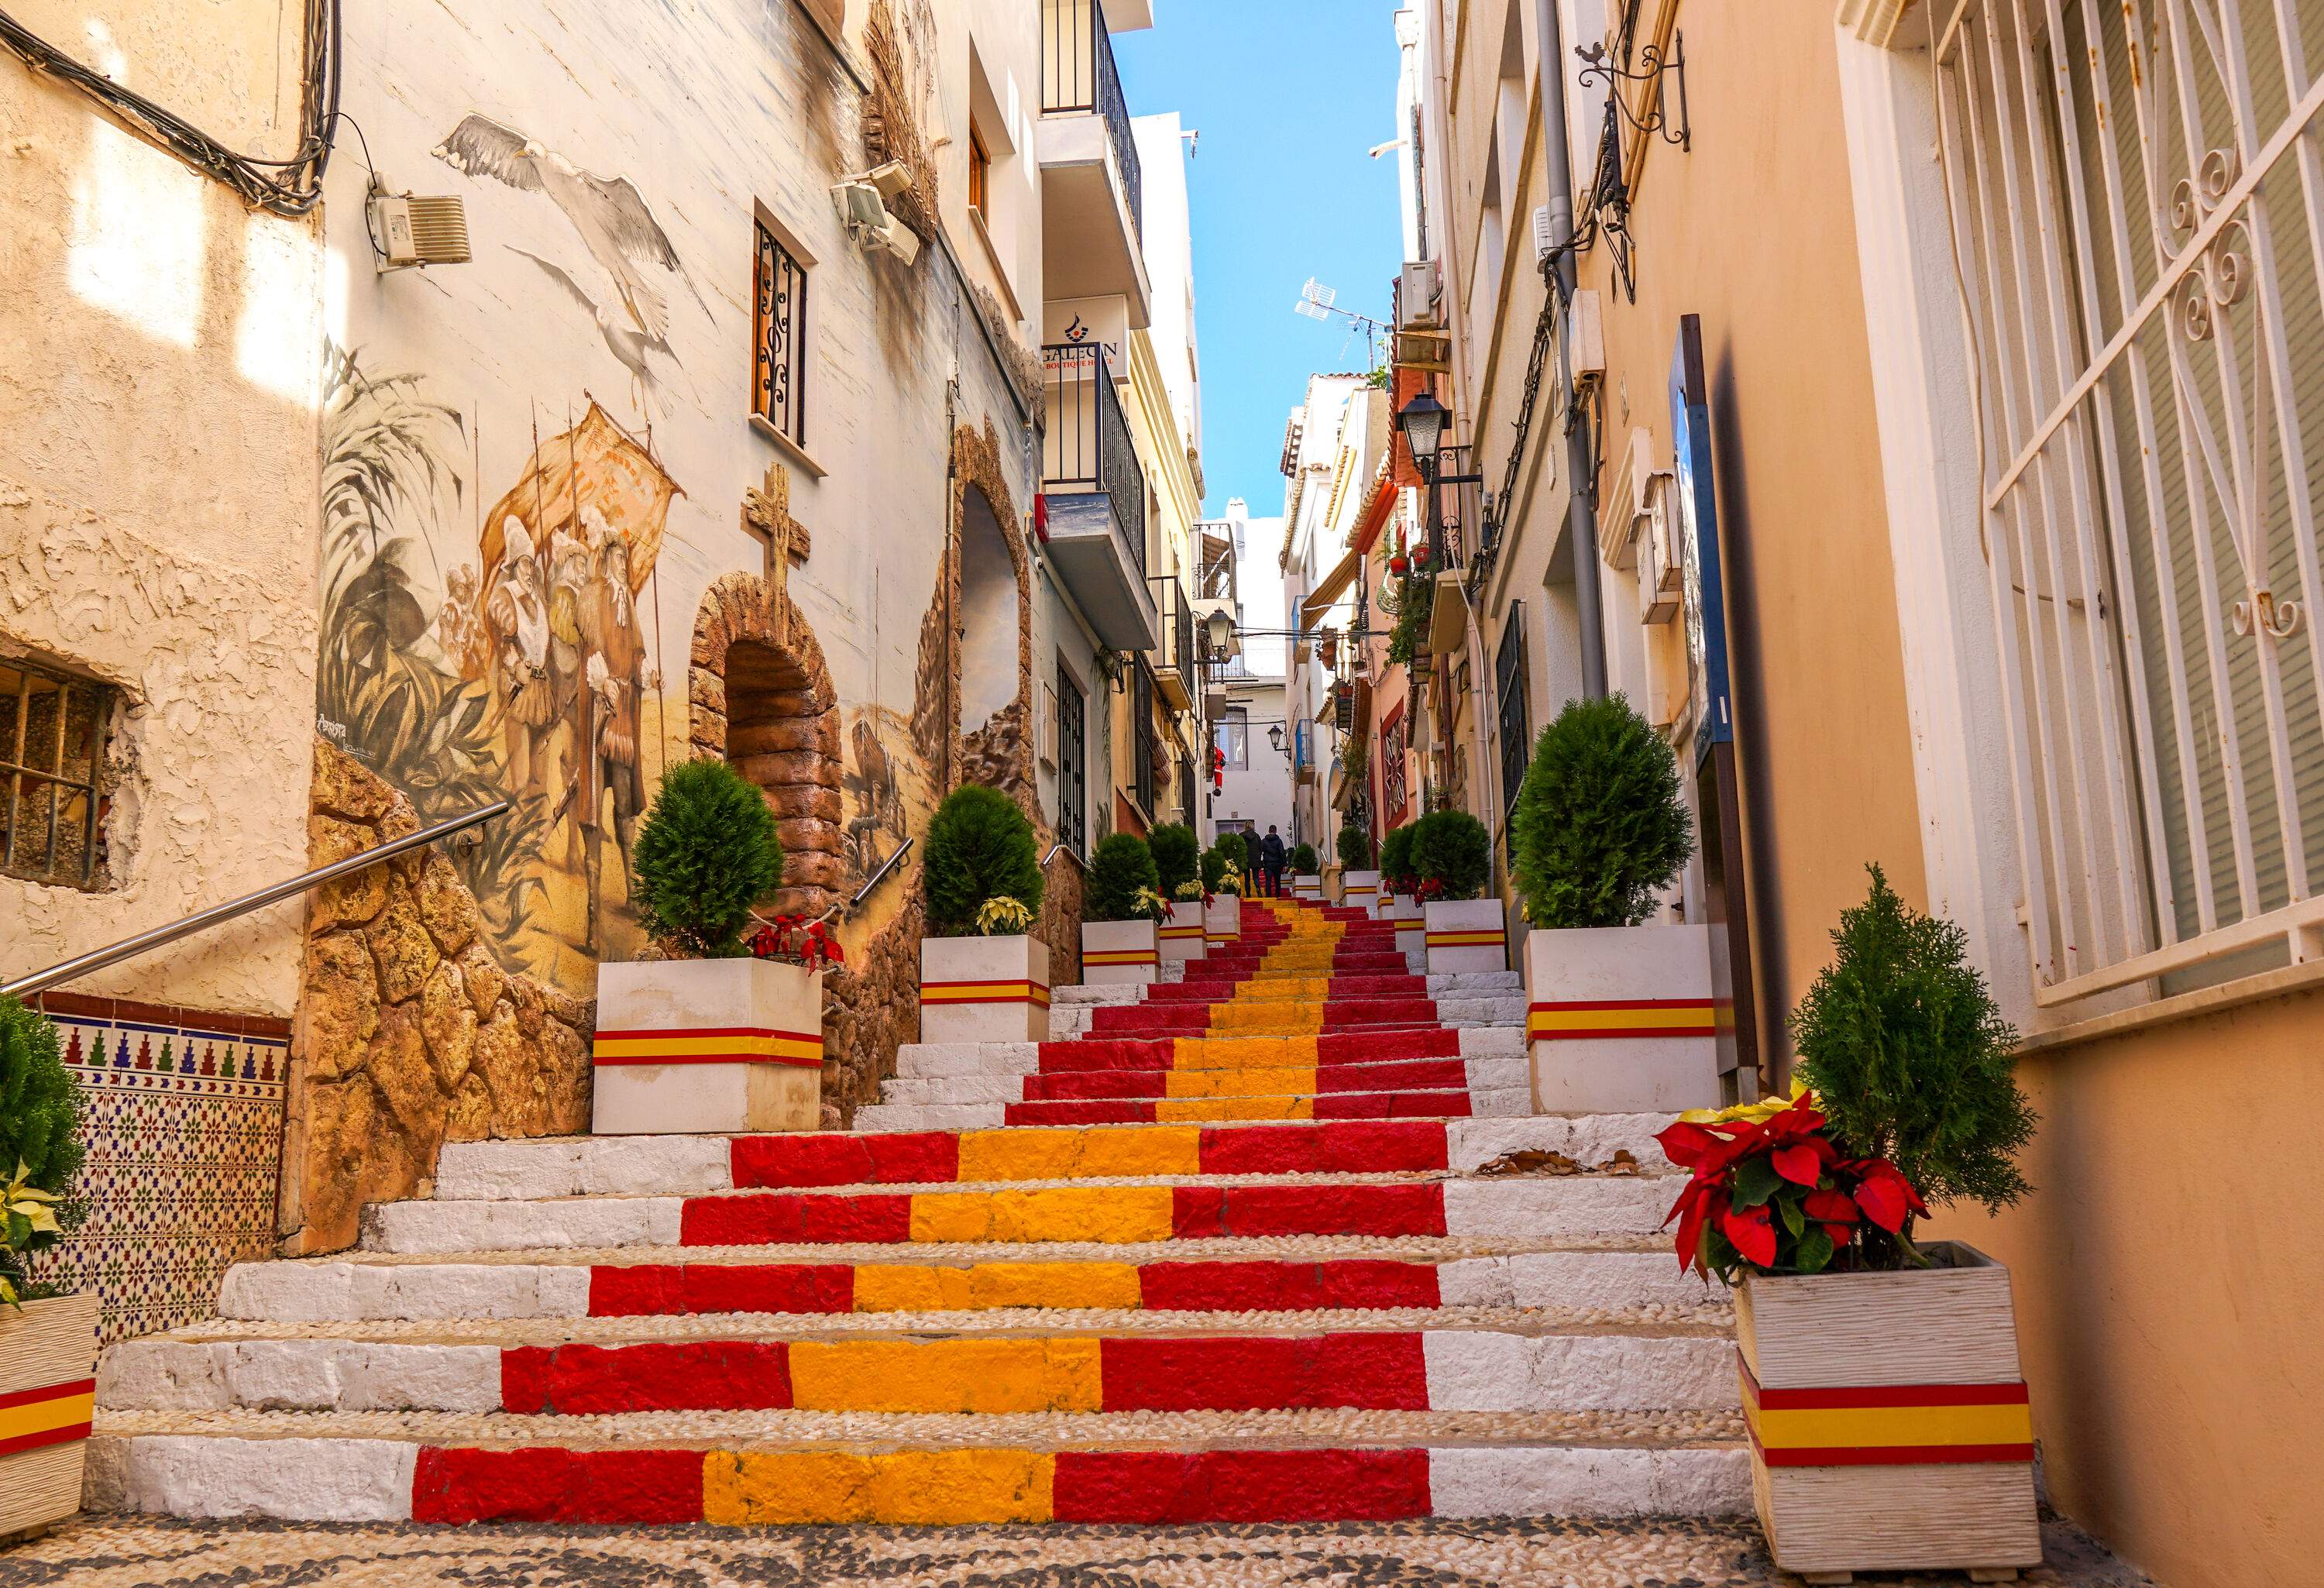 A stairway painted in red and yellow between buildings with paintings on the walls.